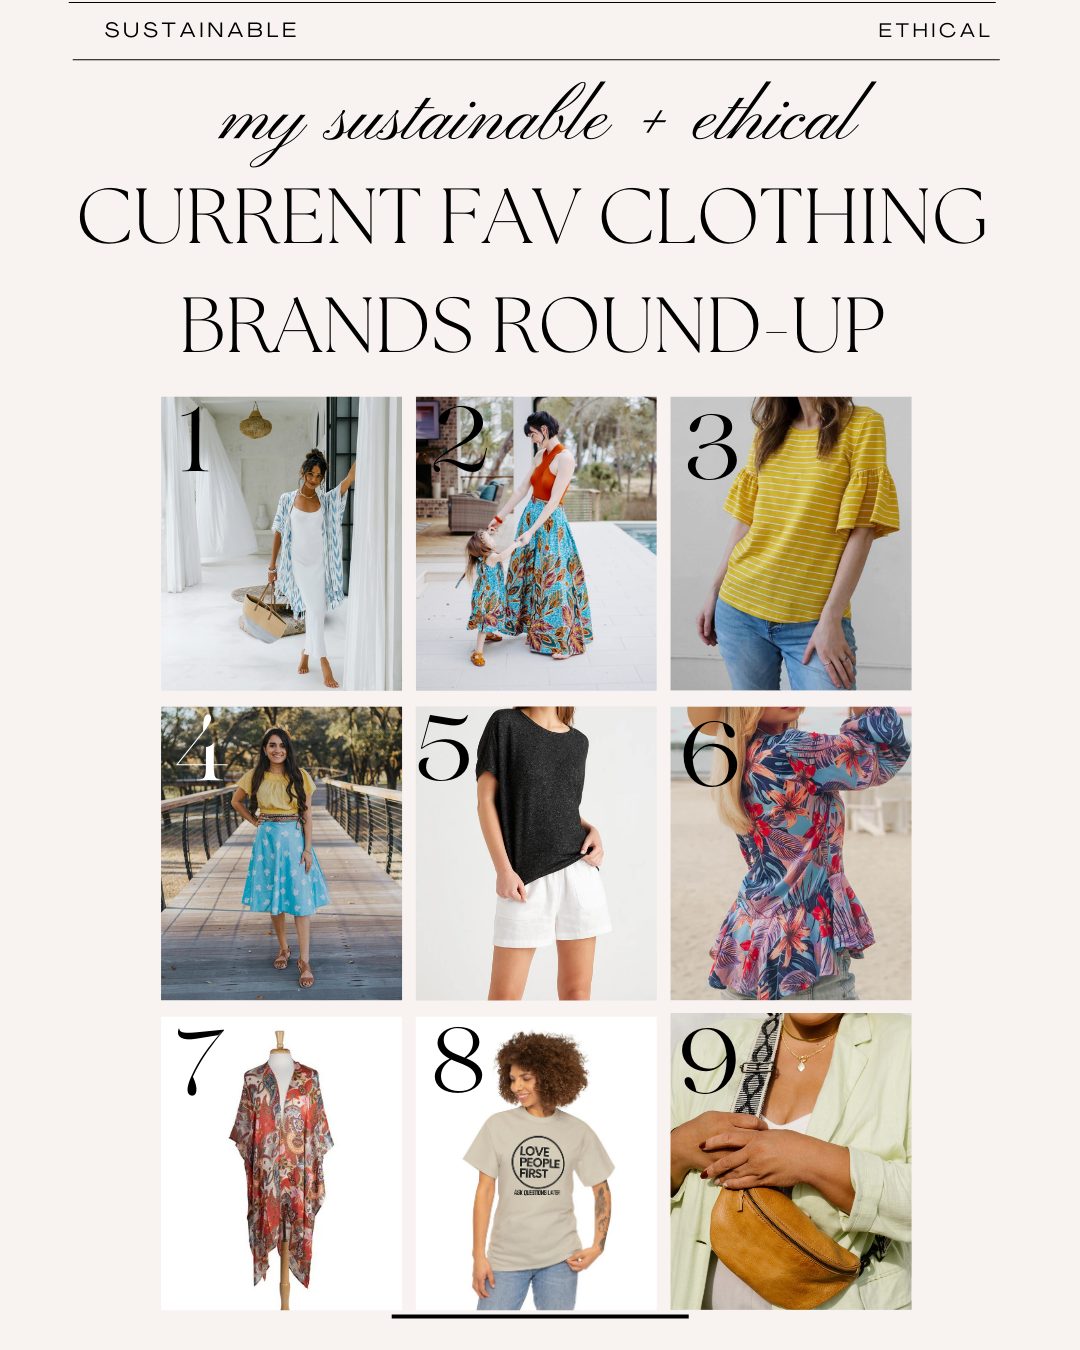 My Current Favorite Clothing Brands, Ethical & Sustainable